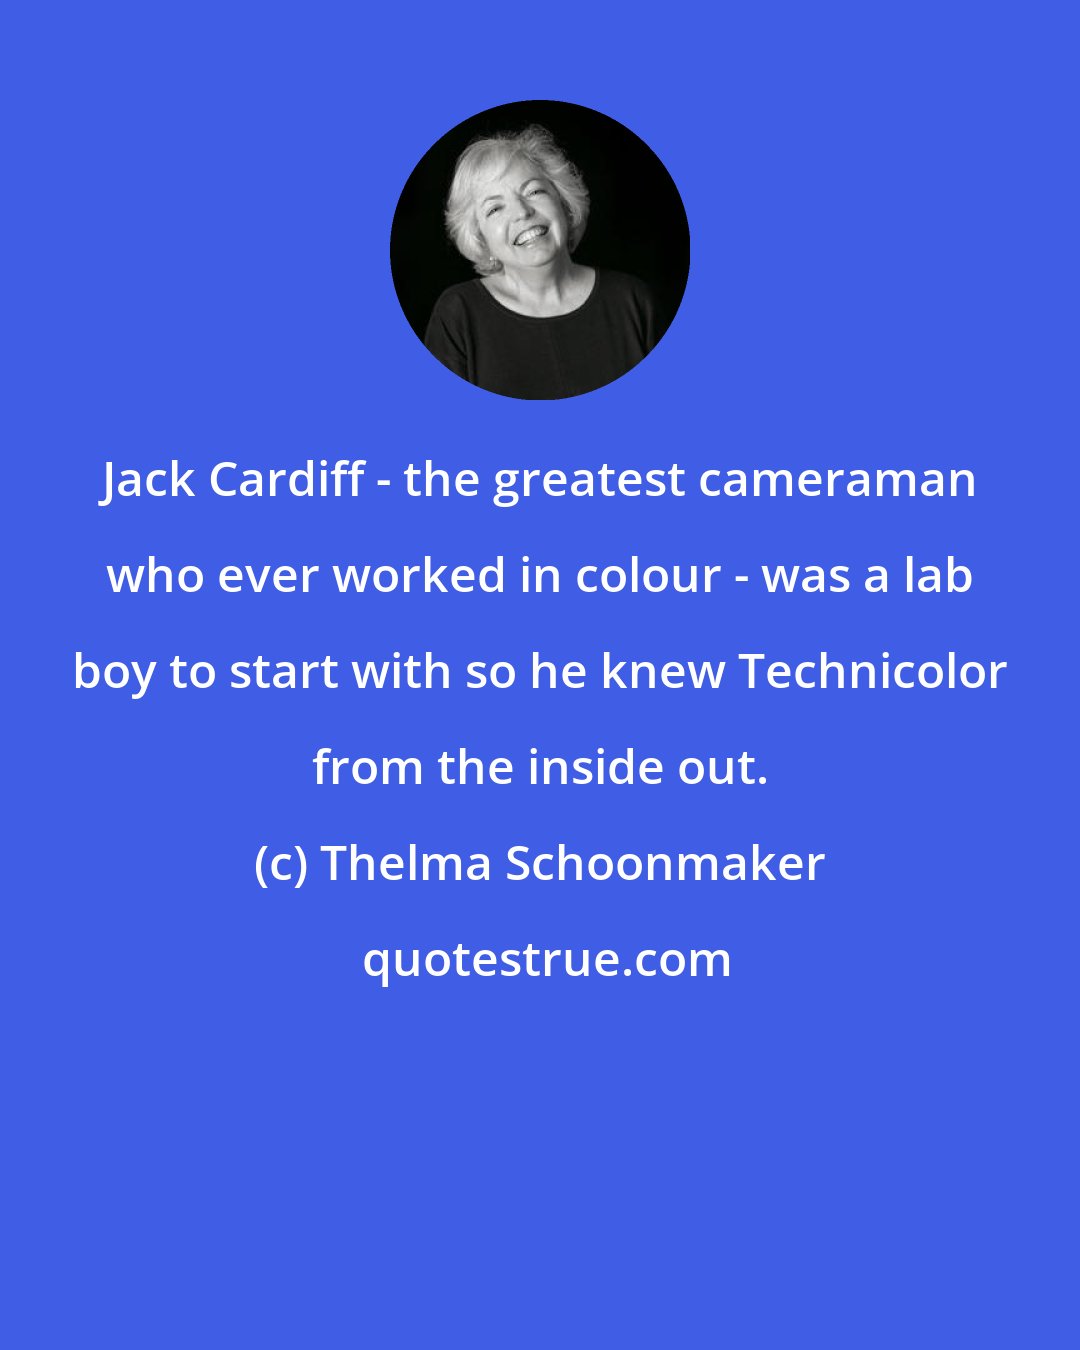 Thelma Schoonmaker: Jack Cardiff - the greatest cameraman who ever worked in colour - was a lab boy to start with so he knew Technicolor from the inside out.